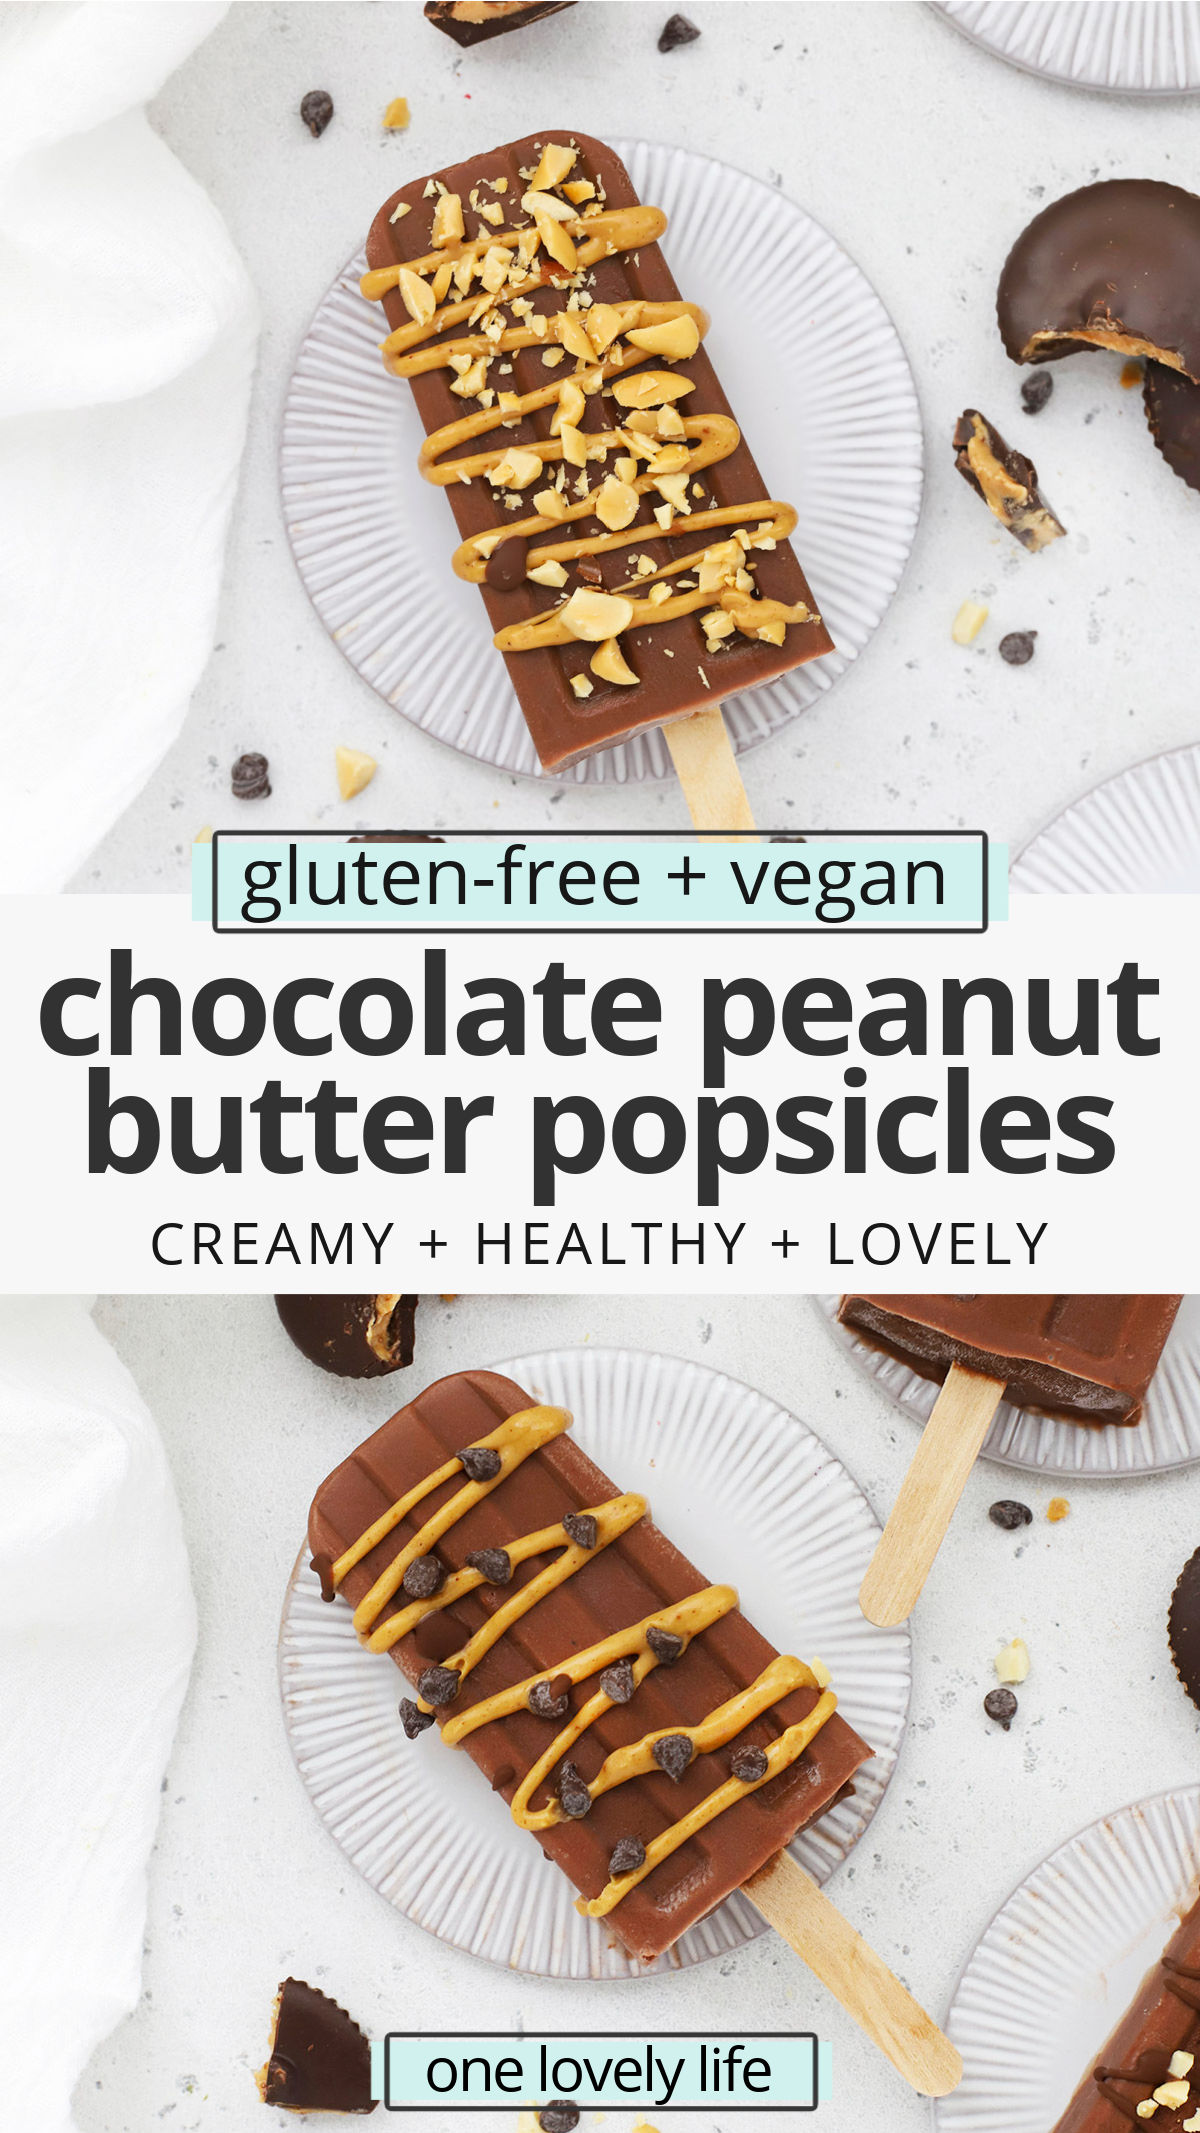 Chocolate Peanut Butter Popsicles (Vegan) - These healthy chocolate peanut butter popsicles feel like such a delicious treat! Creamy, naturally-sweetened, and totally delicious (vegan, gluten-free) // Vegan Chocolate Peanut Butter Popsicles // Chocolate Peanut Butter Banana Popsicles // Healthy Popsicle Recipe // chocolate popsicle // peanut butter fudge popsicles // peanut butter popsicles